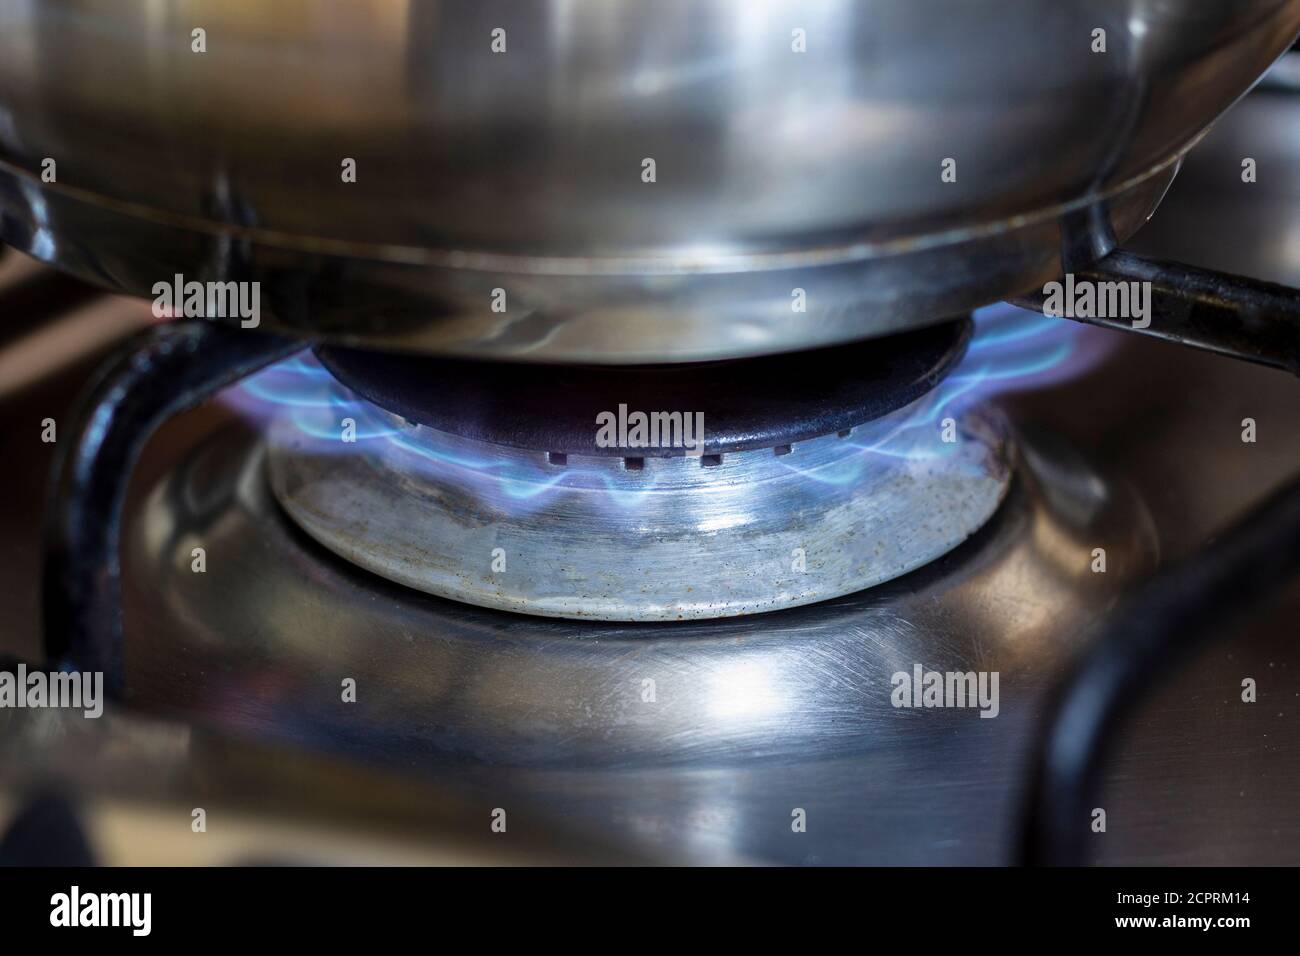 https://c8.alamy.com/comp/2CPRM14/close-up-of-a-stainless-steel-pot-standing-on-a-kitchen-stove-with-a-gas-burner-on-2CPRM14.jpg